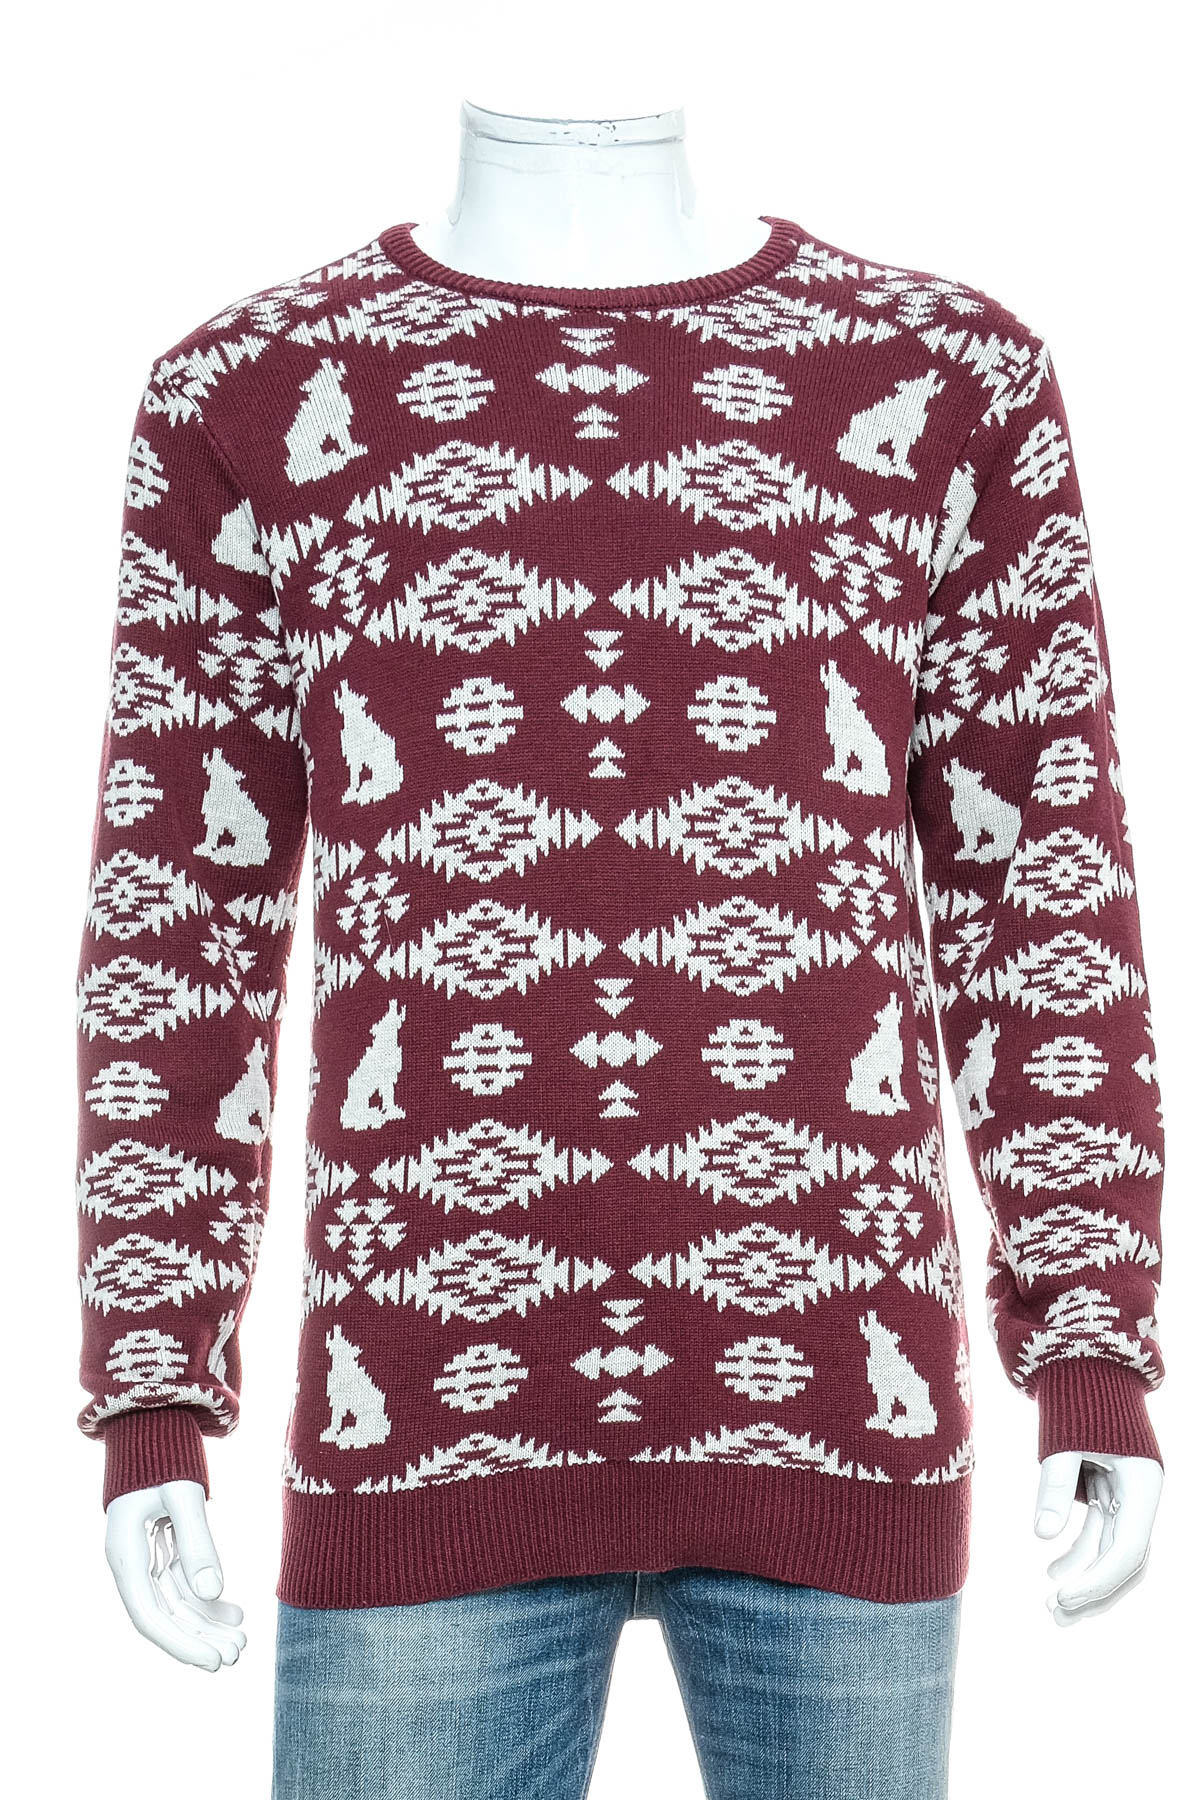 Men's sweater - ON THE BYAS - 0